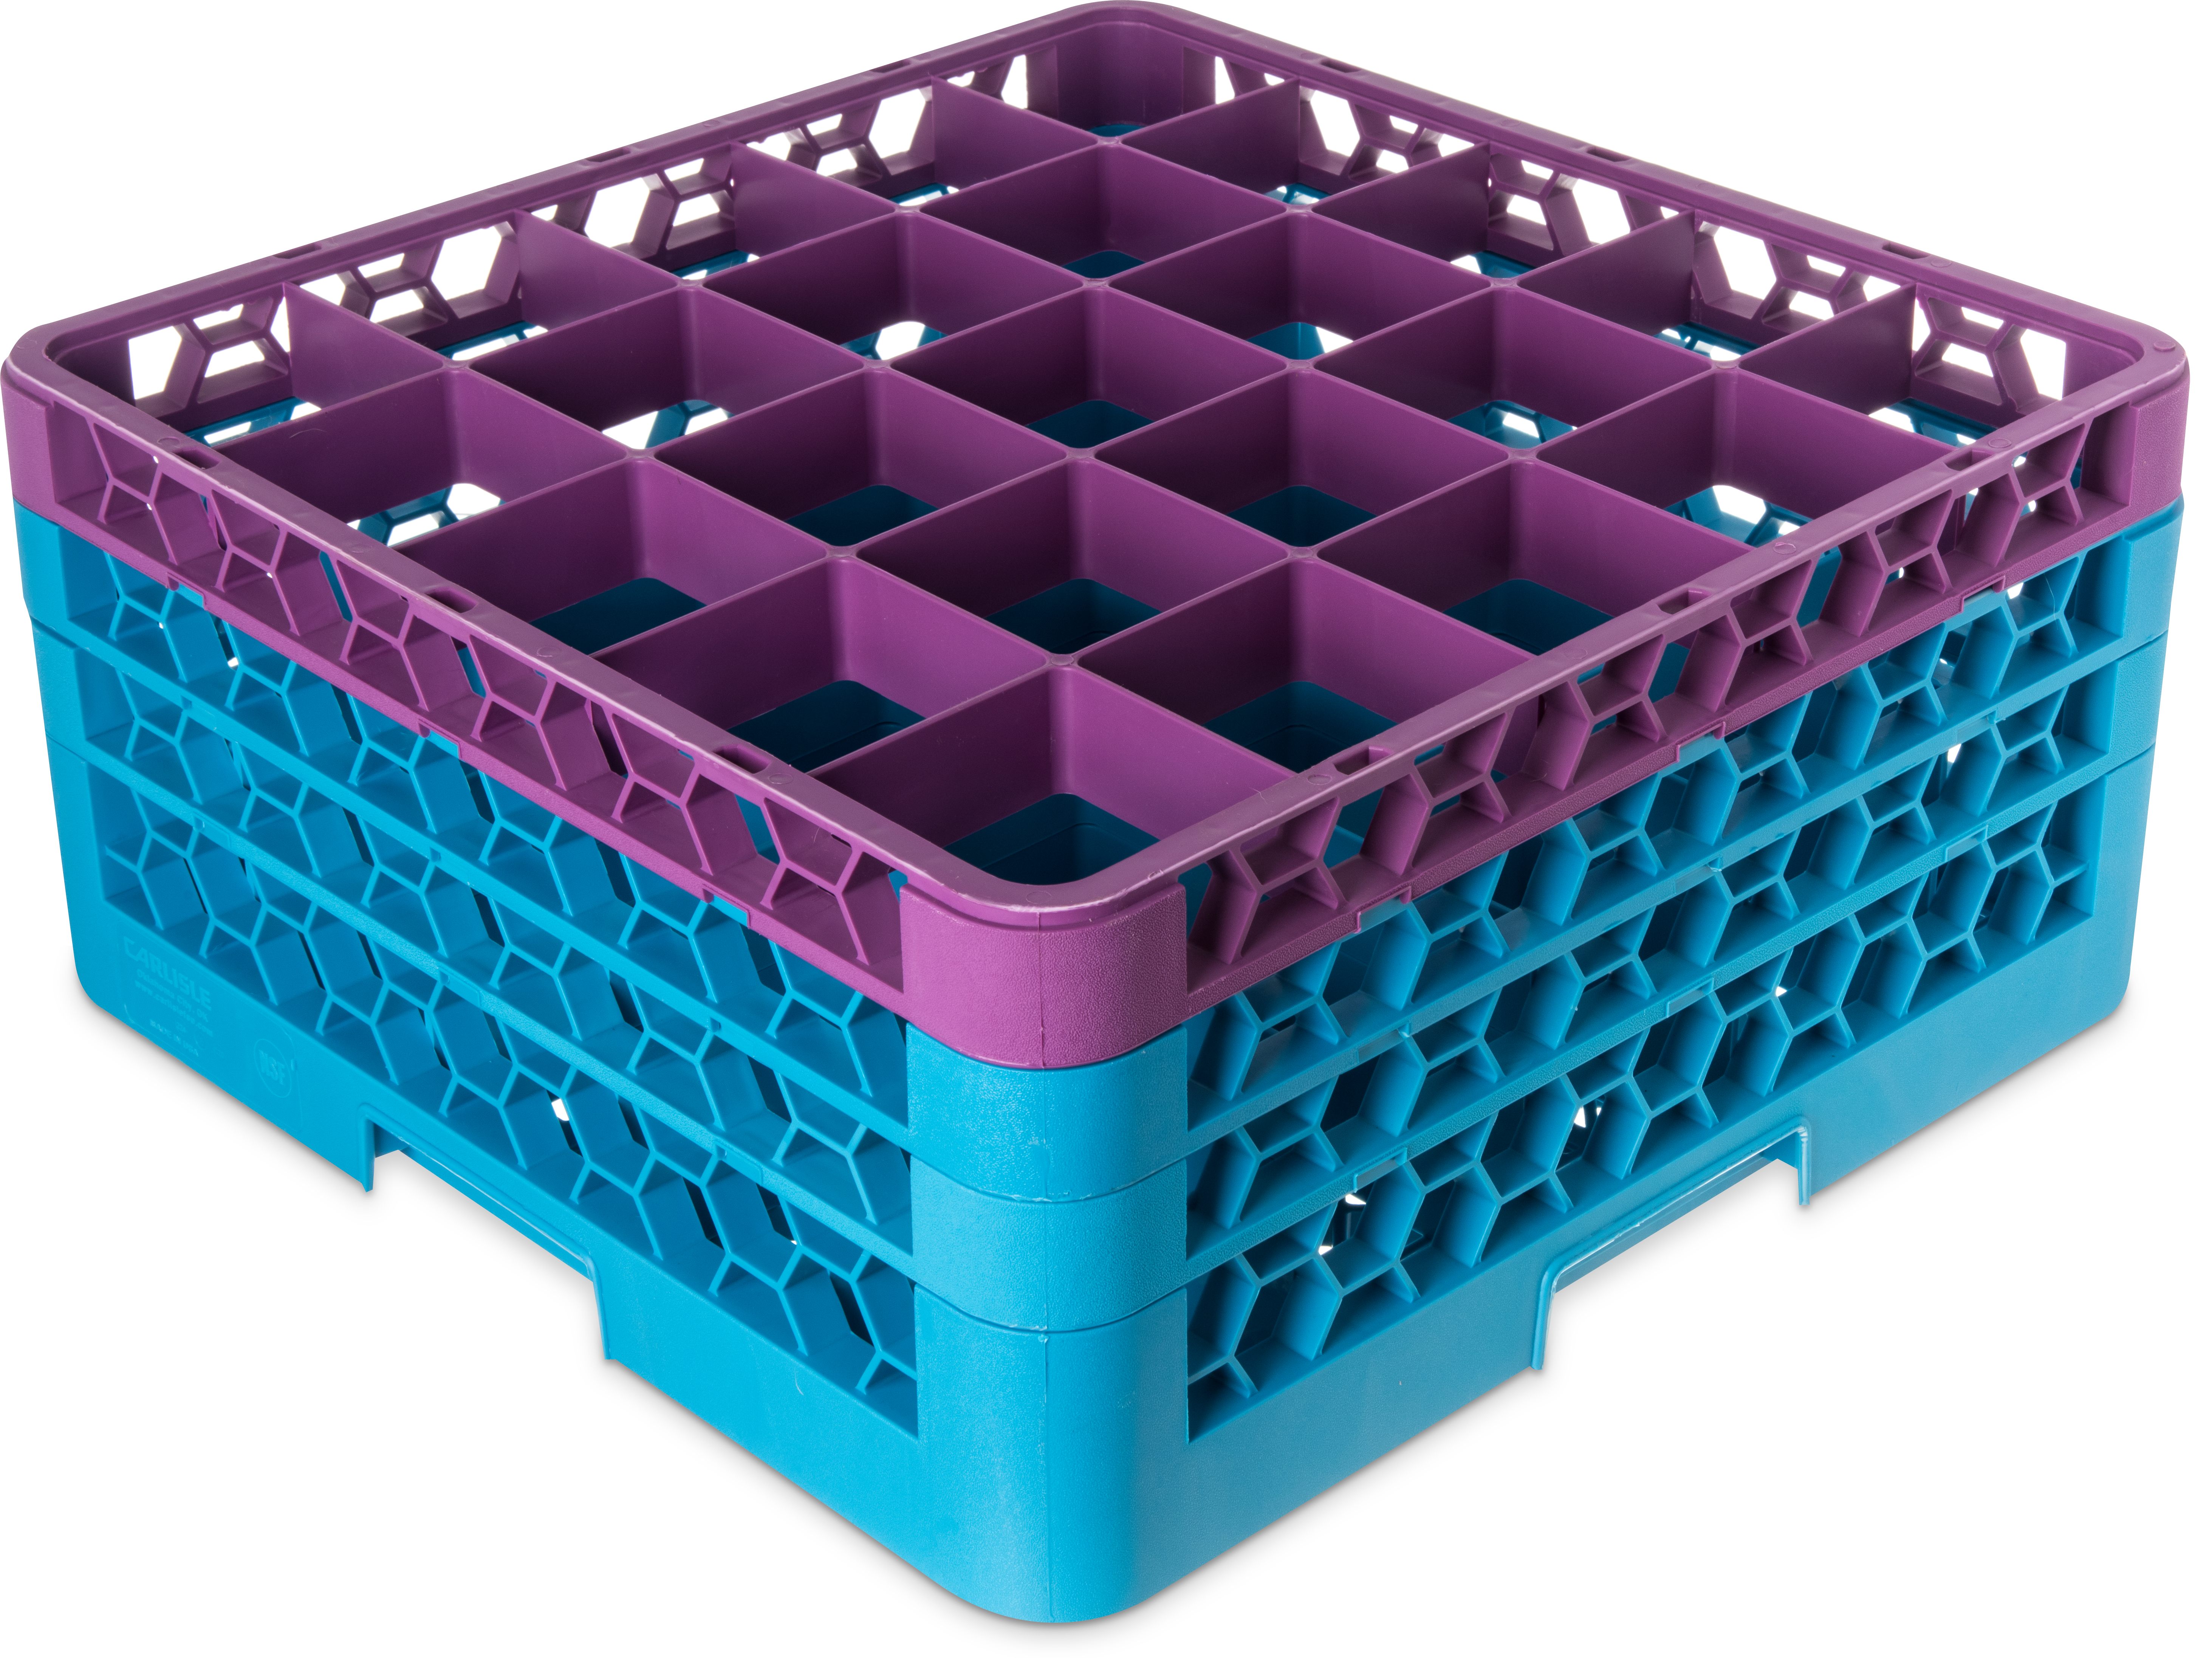 OptiClean 25 Compartment Glass Rack with 3 Extenders 8.72 - Lavender-Carlisle Blue